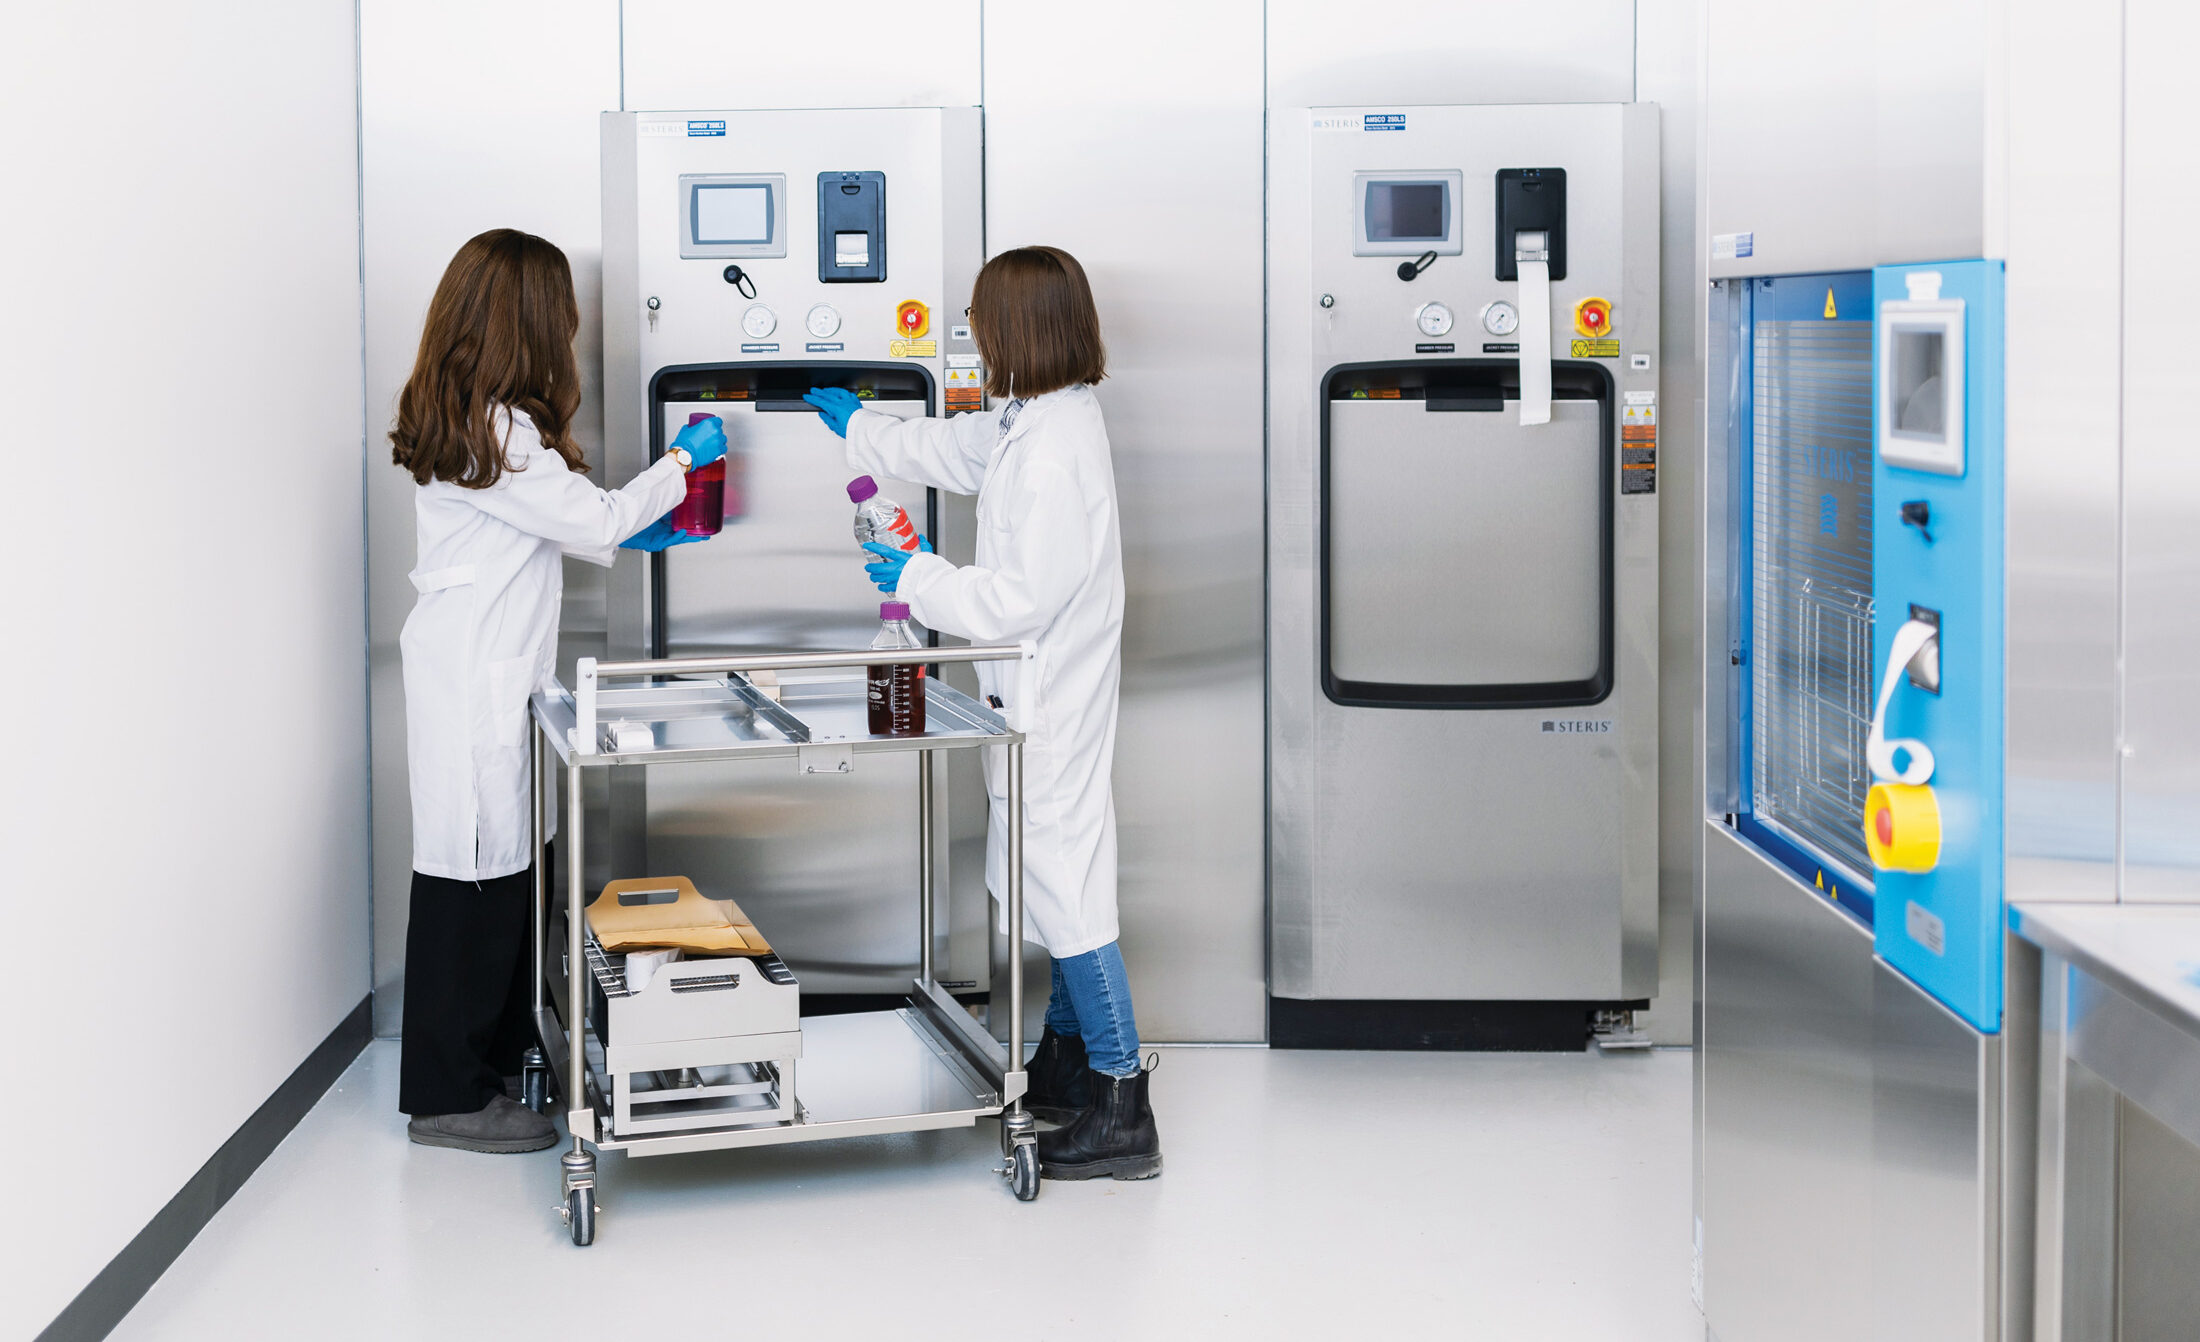 Evelina Tronina and Seema Malmji, wearing white lab coats and blue disposable gloves, are holding bottles of liquid, with a trolley between them. One student is pulling open a panel on the front of a tall, stainless-steel scientific device in a wet lab room.